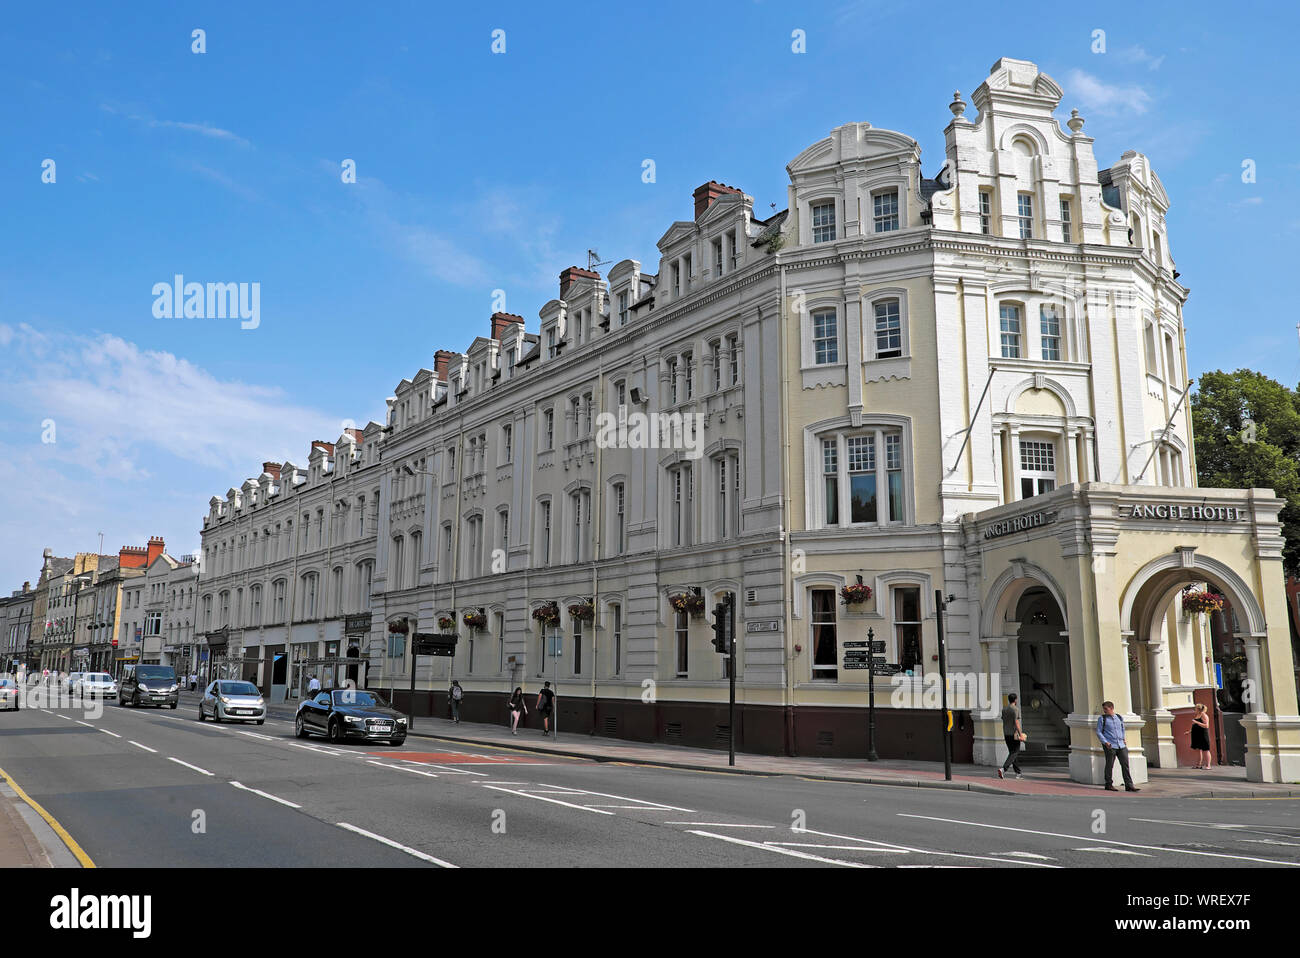 View of the Angel Hotel building on Castle Street in Cardiff City Centre Wales UK  KATHY DEWITT Stock Photo